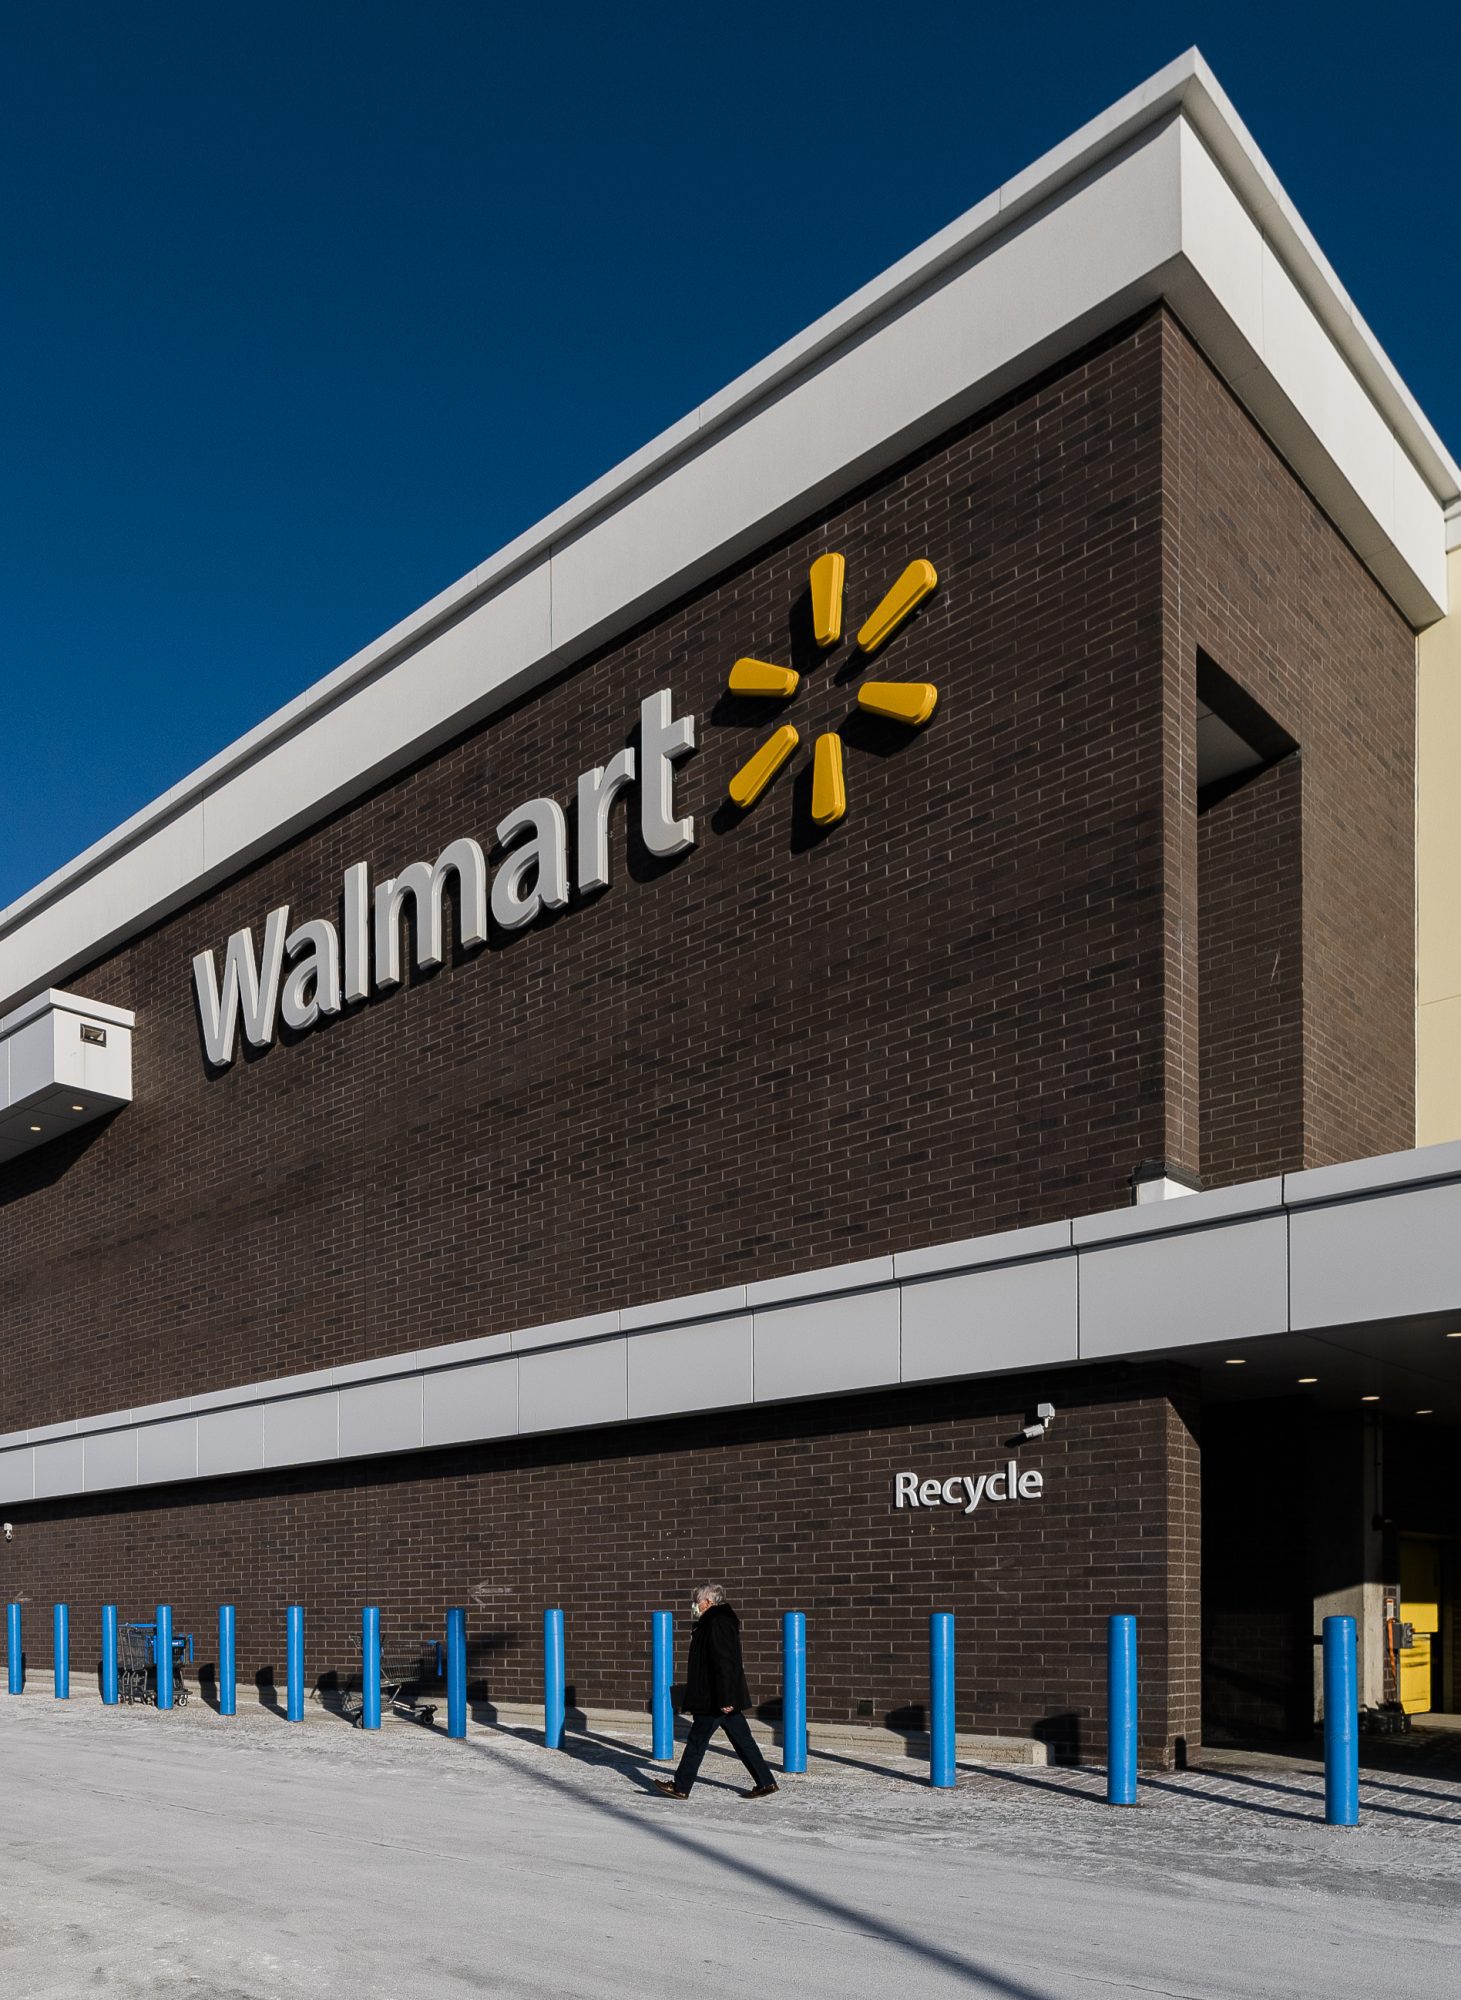 Walmart begins construction of Route 1 Saugus store - The Boston Globe